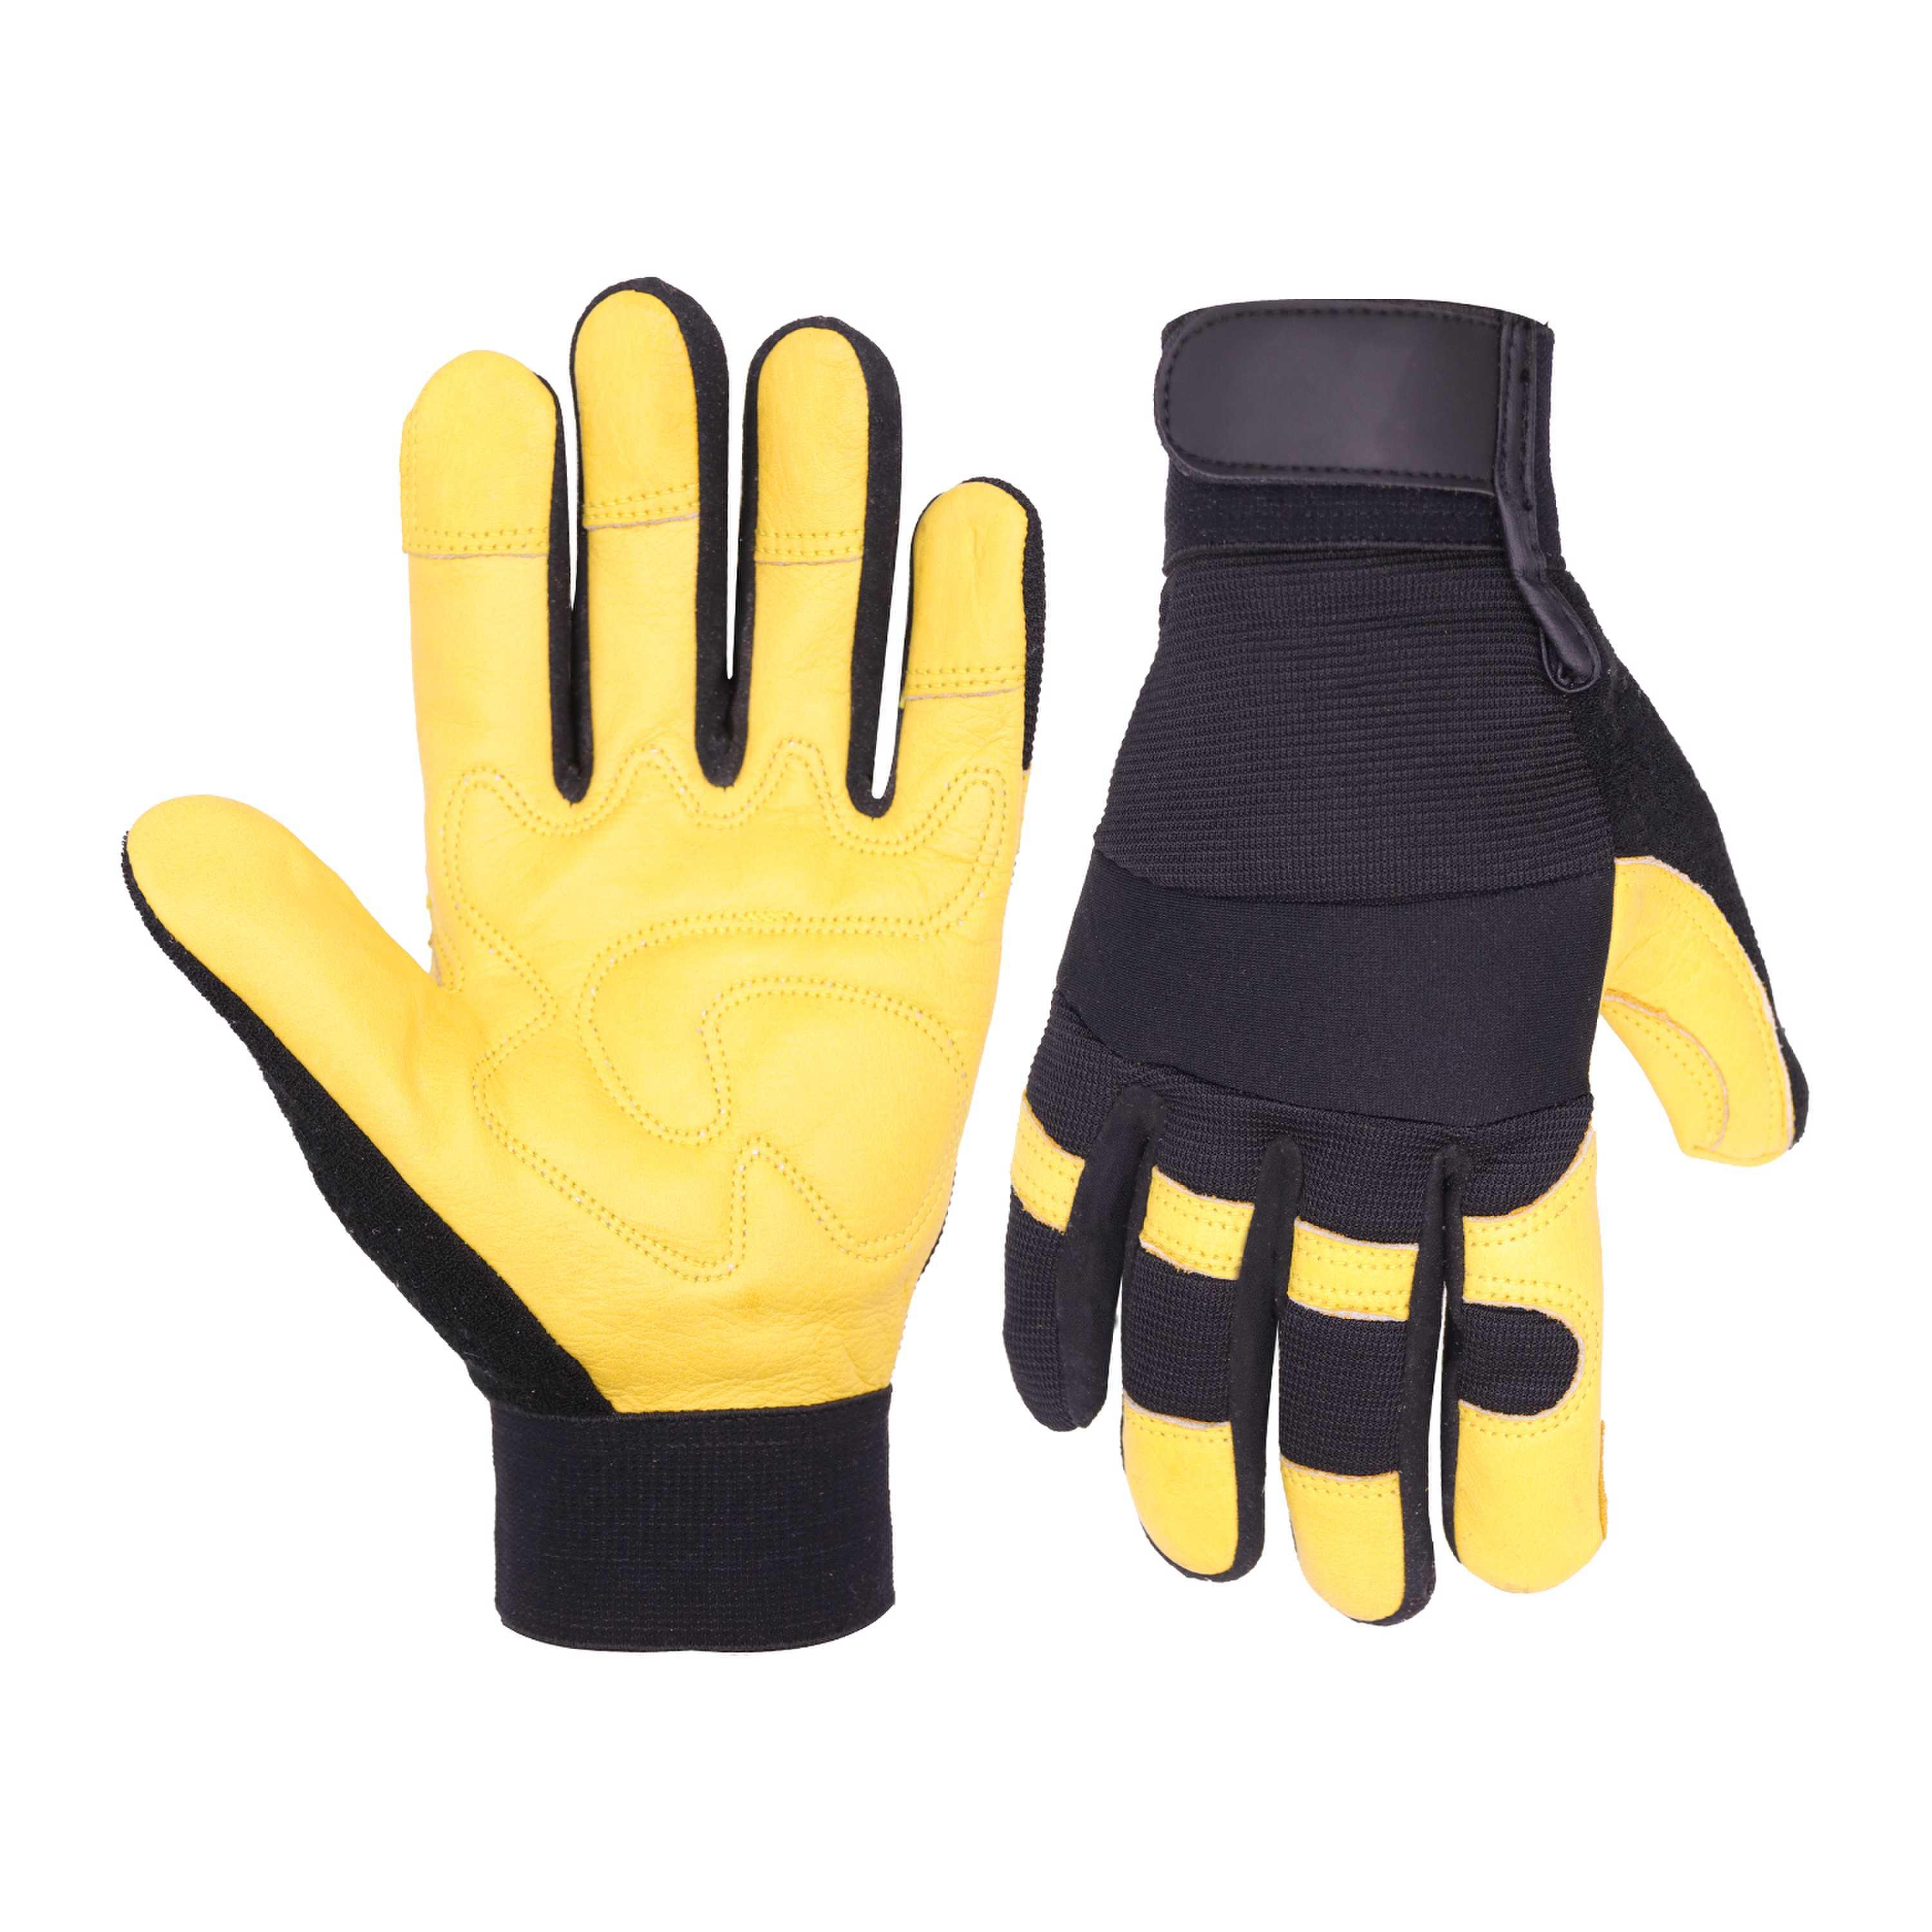 6132 PRISAFETY Hybrid Leather Mechanics Gloves Dexterity Men Utilty Work Golves Durable Stretch Fit for Driver, Construction, Yard Work